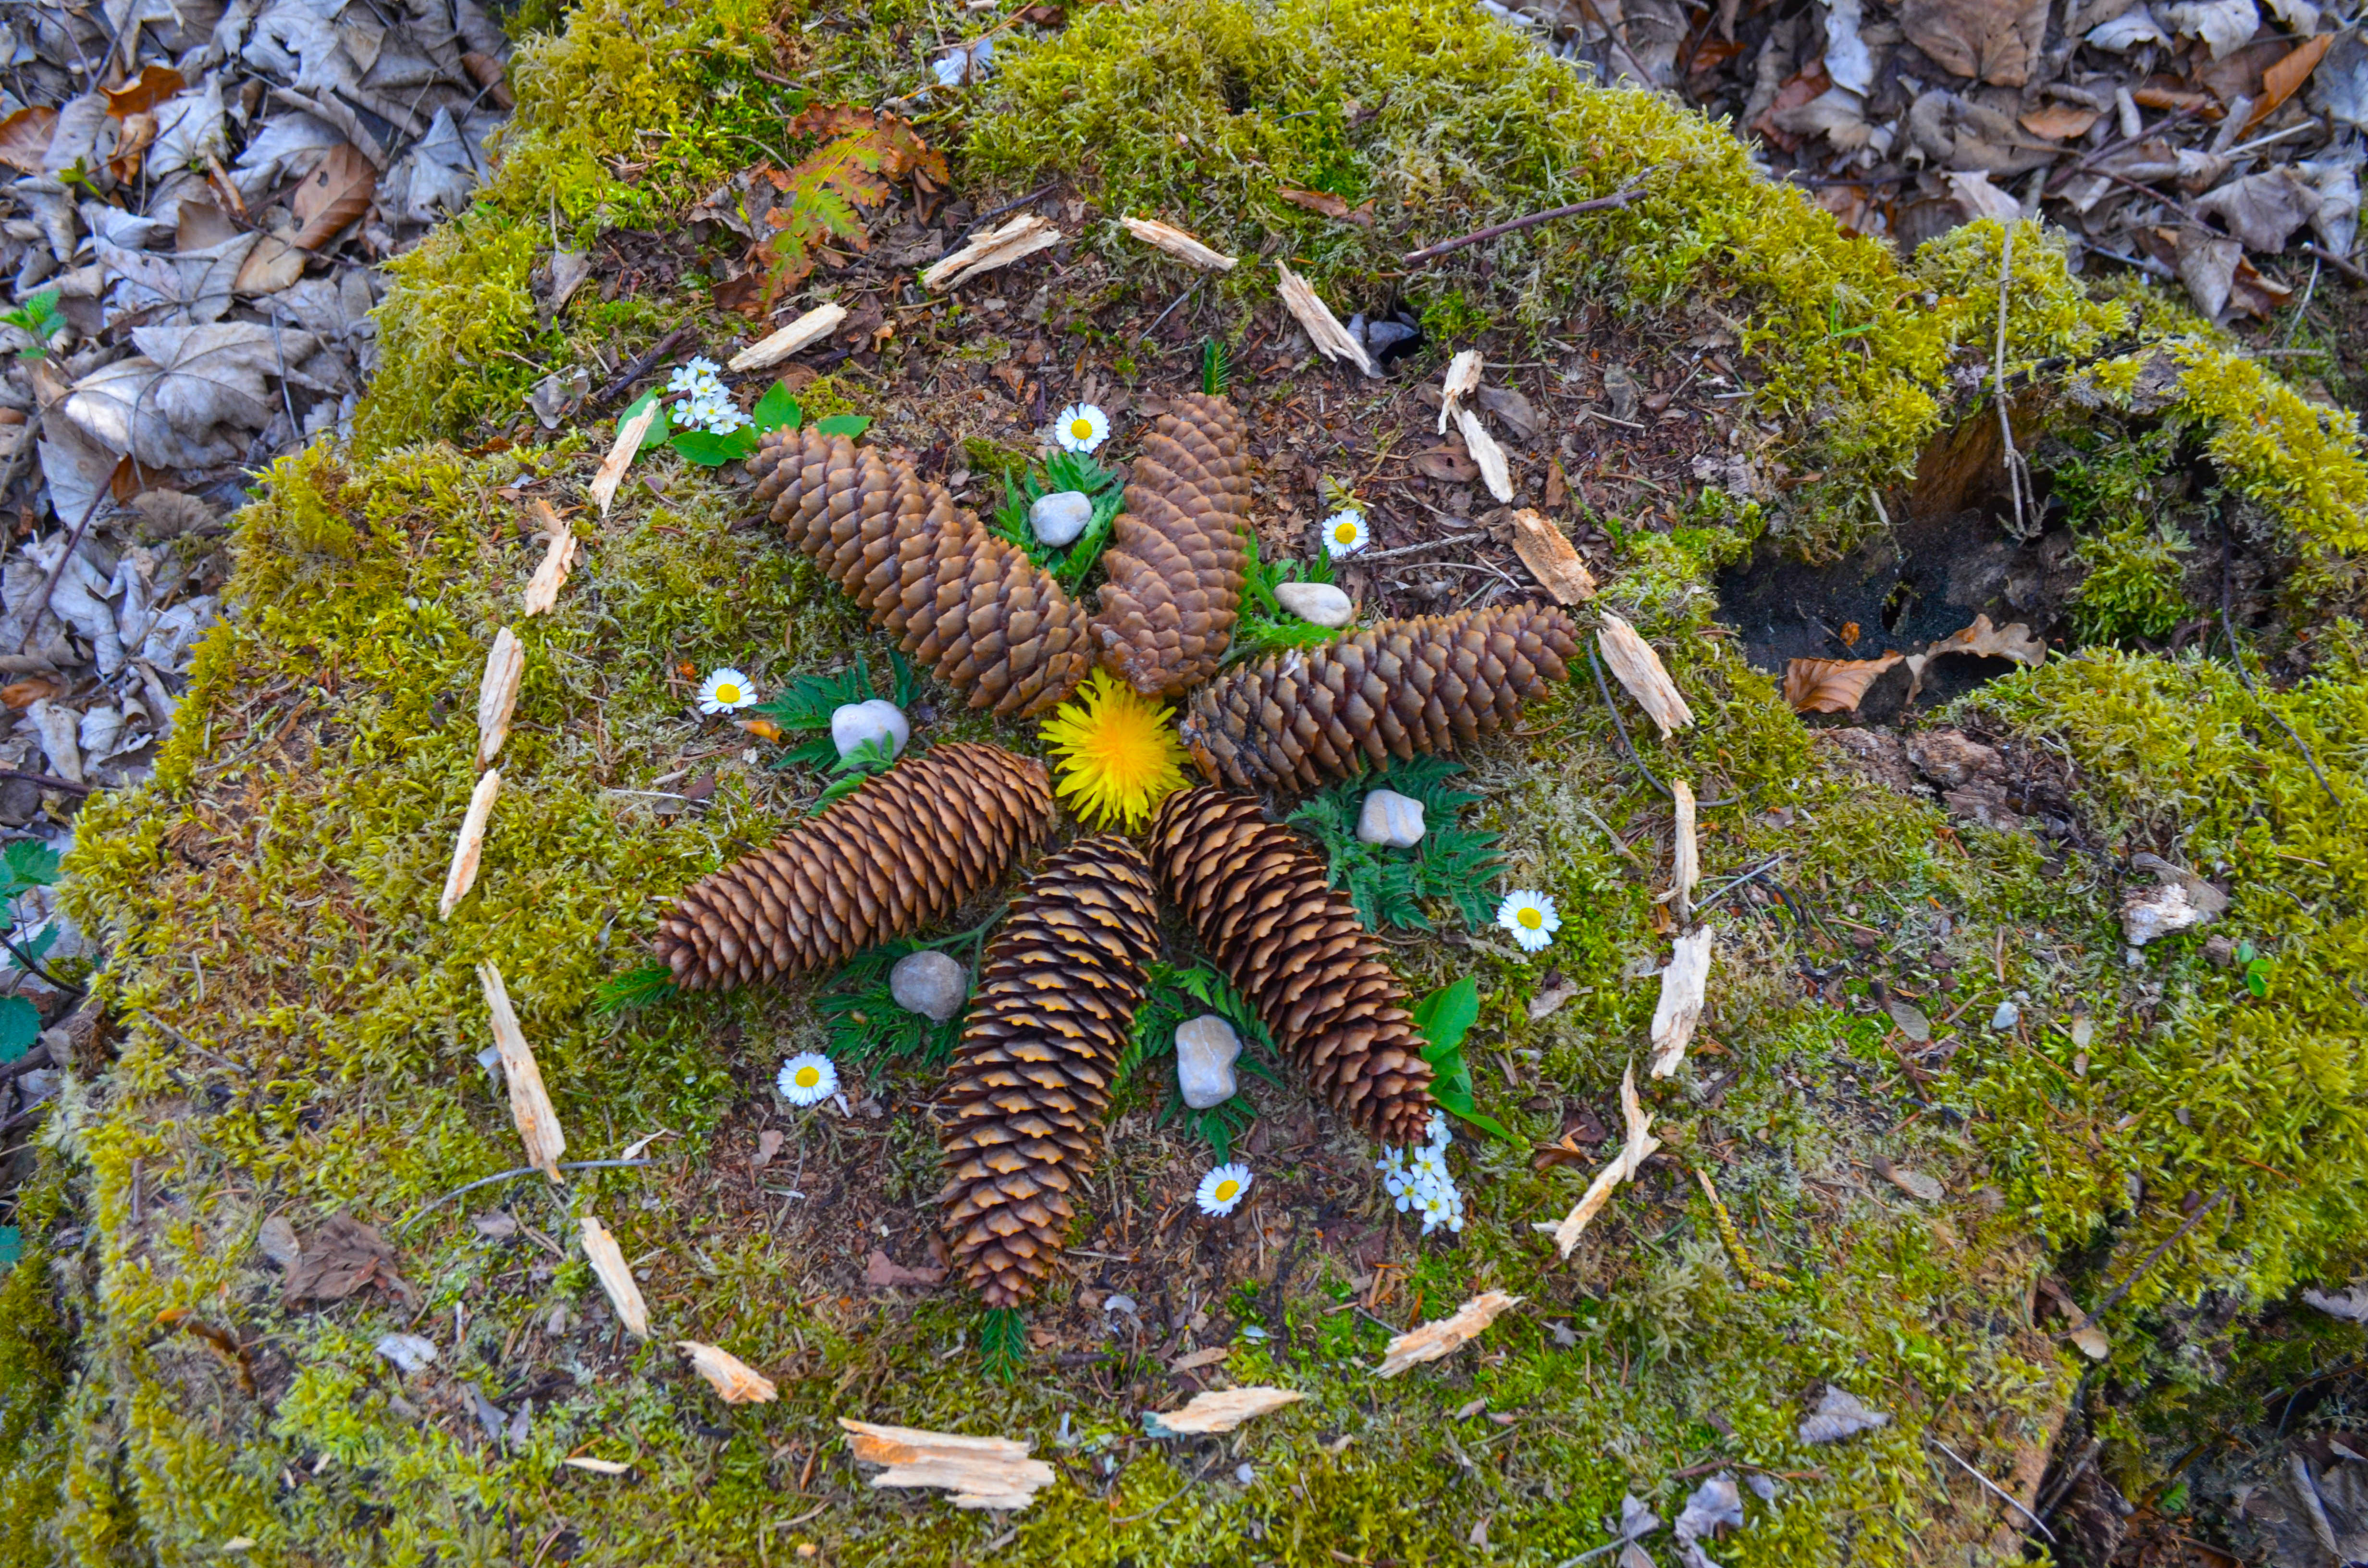 Radiating out from the center, a circular design crafted with natural objects such as leaves, pine cones, and flower petals sits atop a moss covered rock. This is a mandala made from natural objects. 